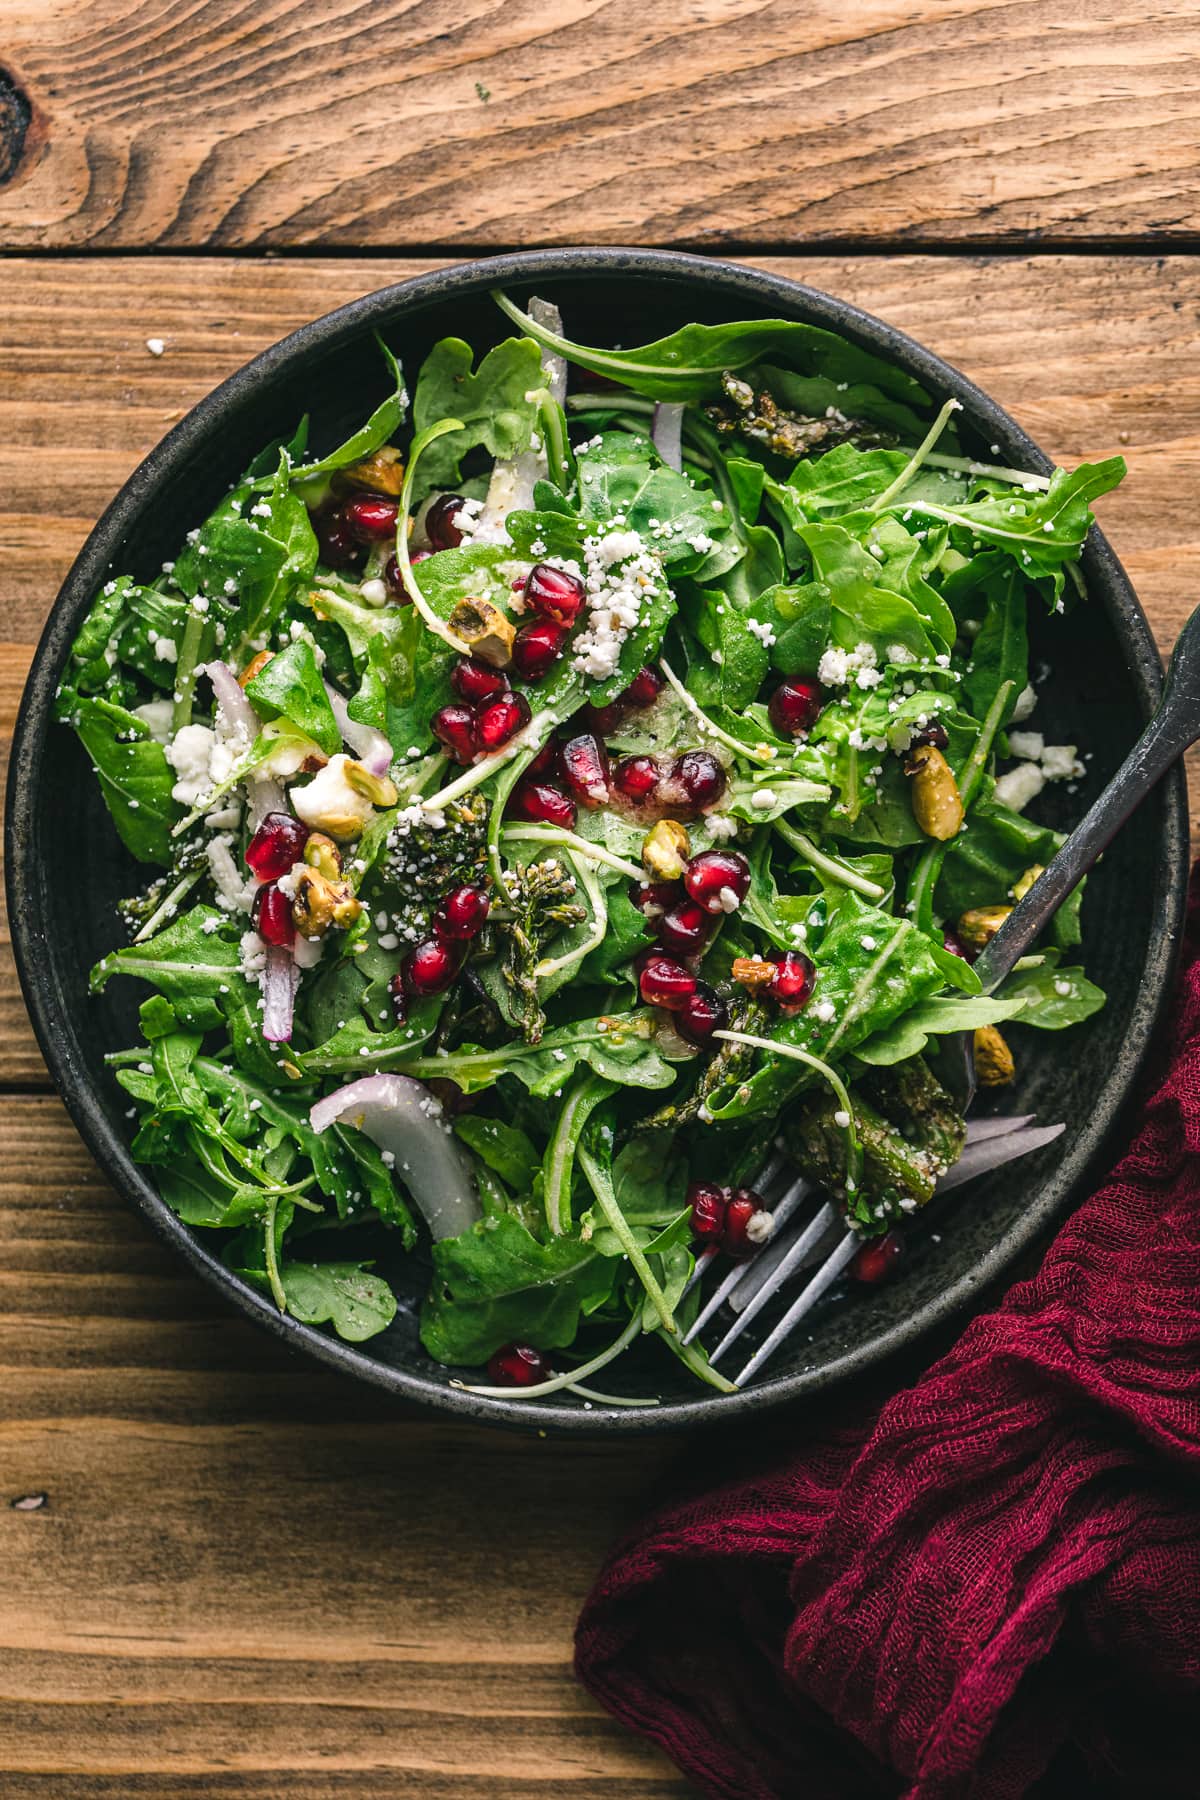 Pomegranate and feta salad with roasted broccolini in a black dish.